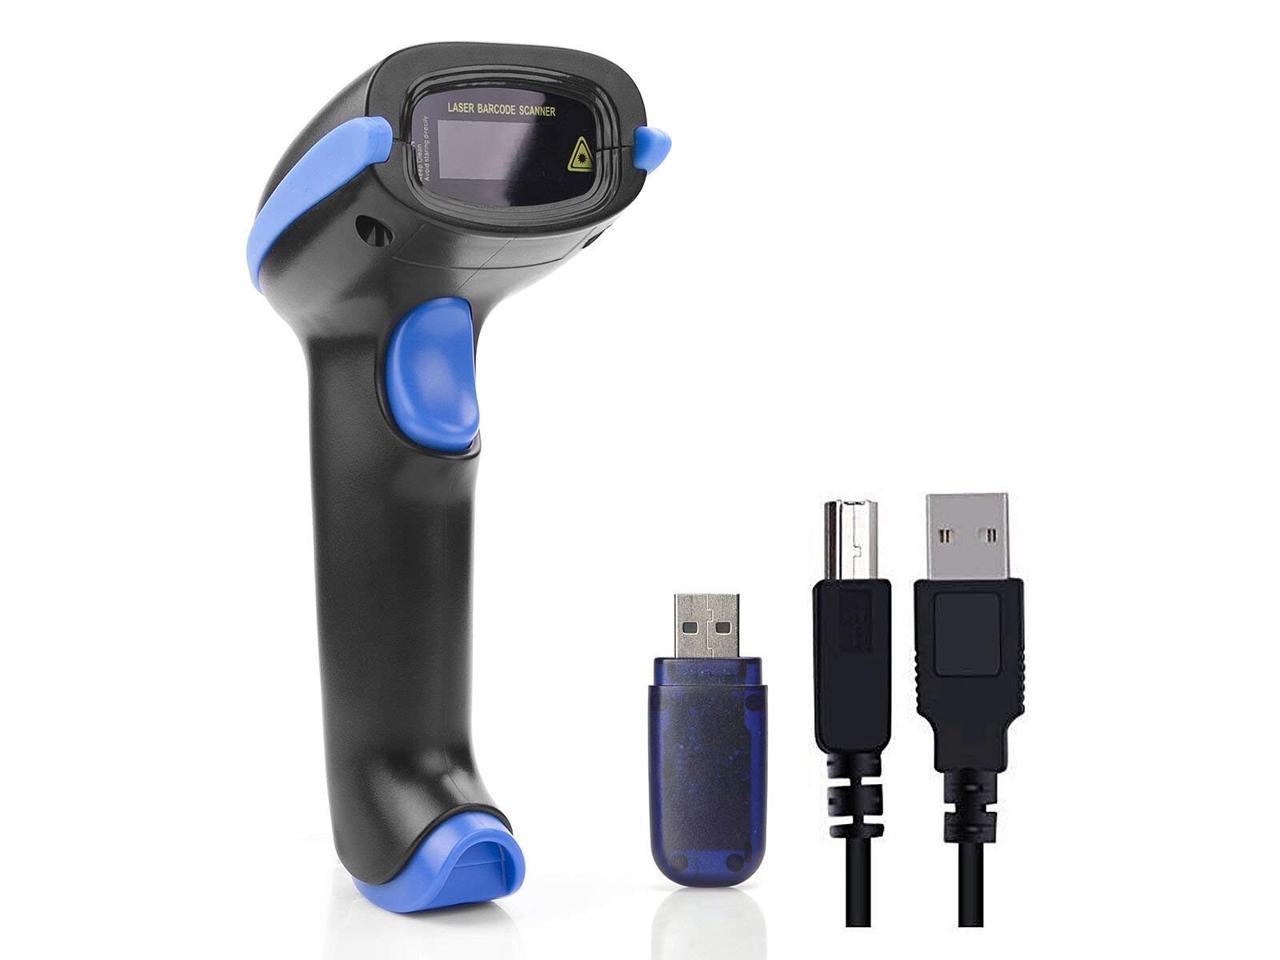 No 2.4G Wireless Barcode Scanner 1D Reader With 328 Feet Transmission Distance 